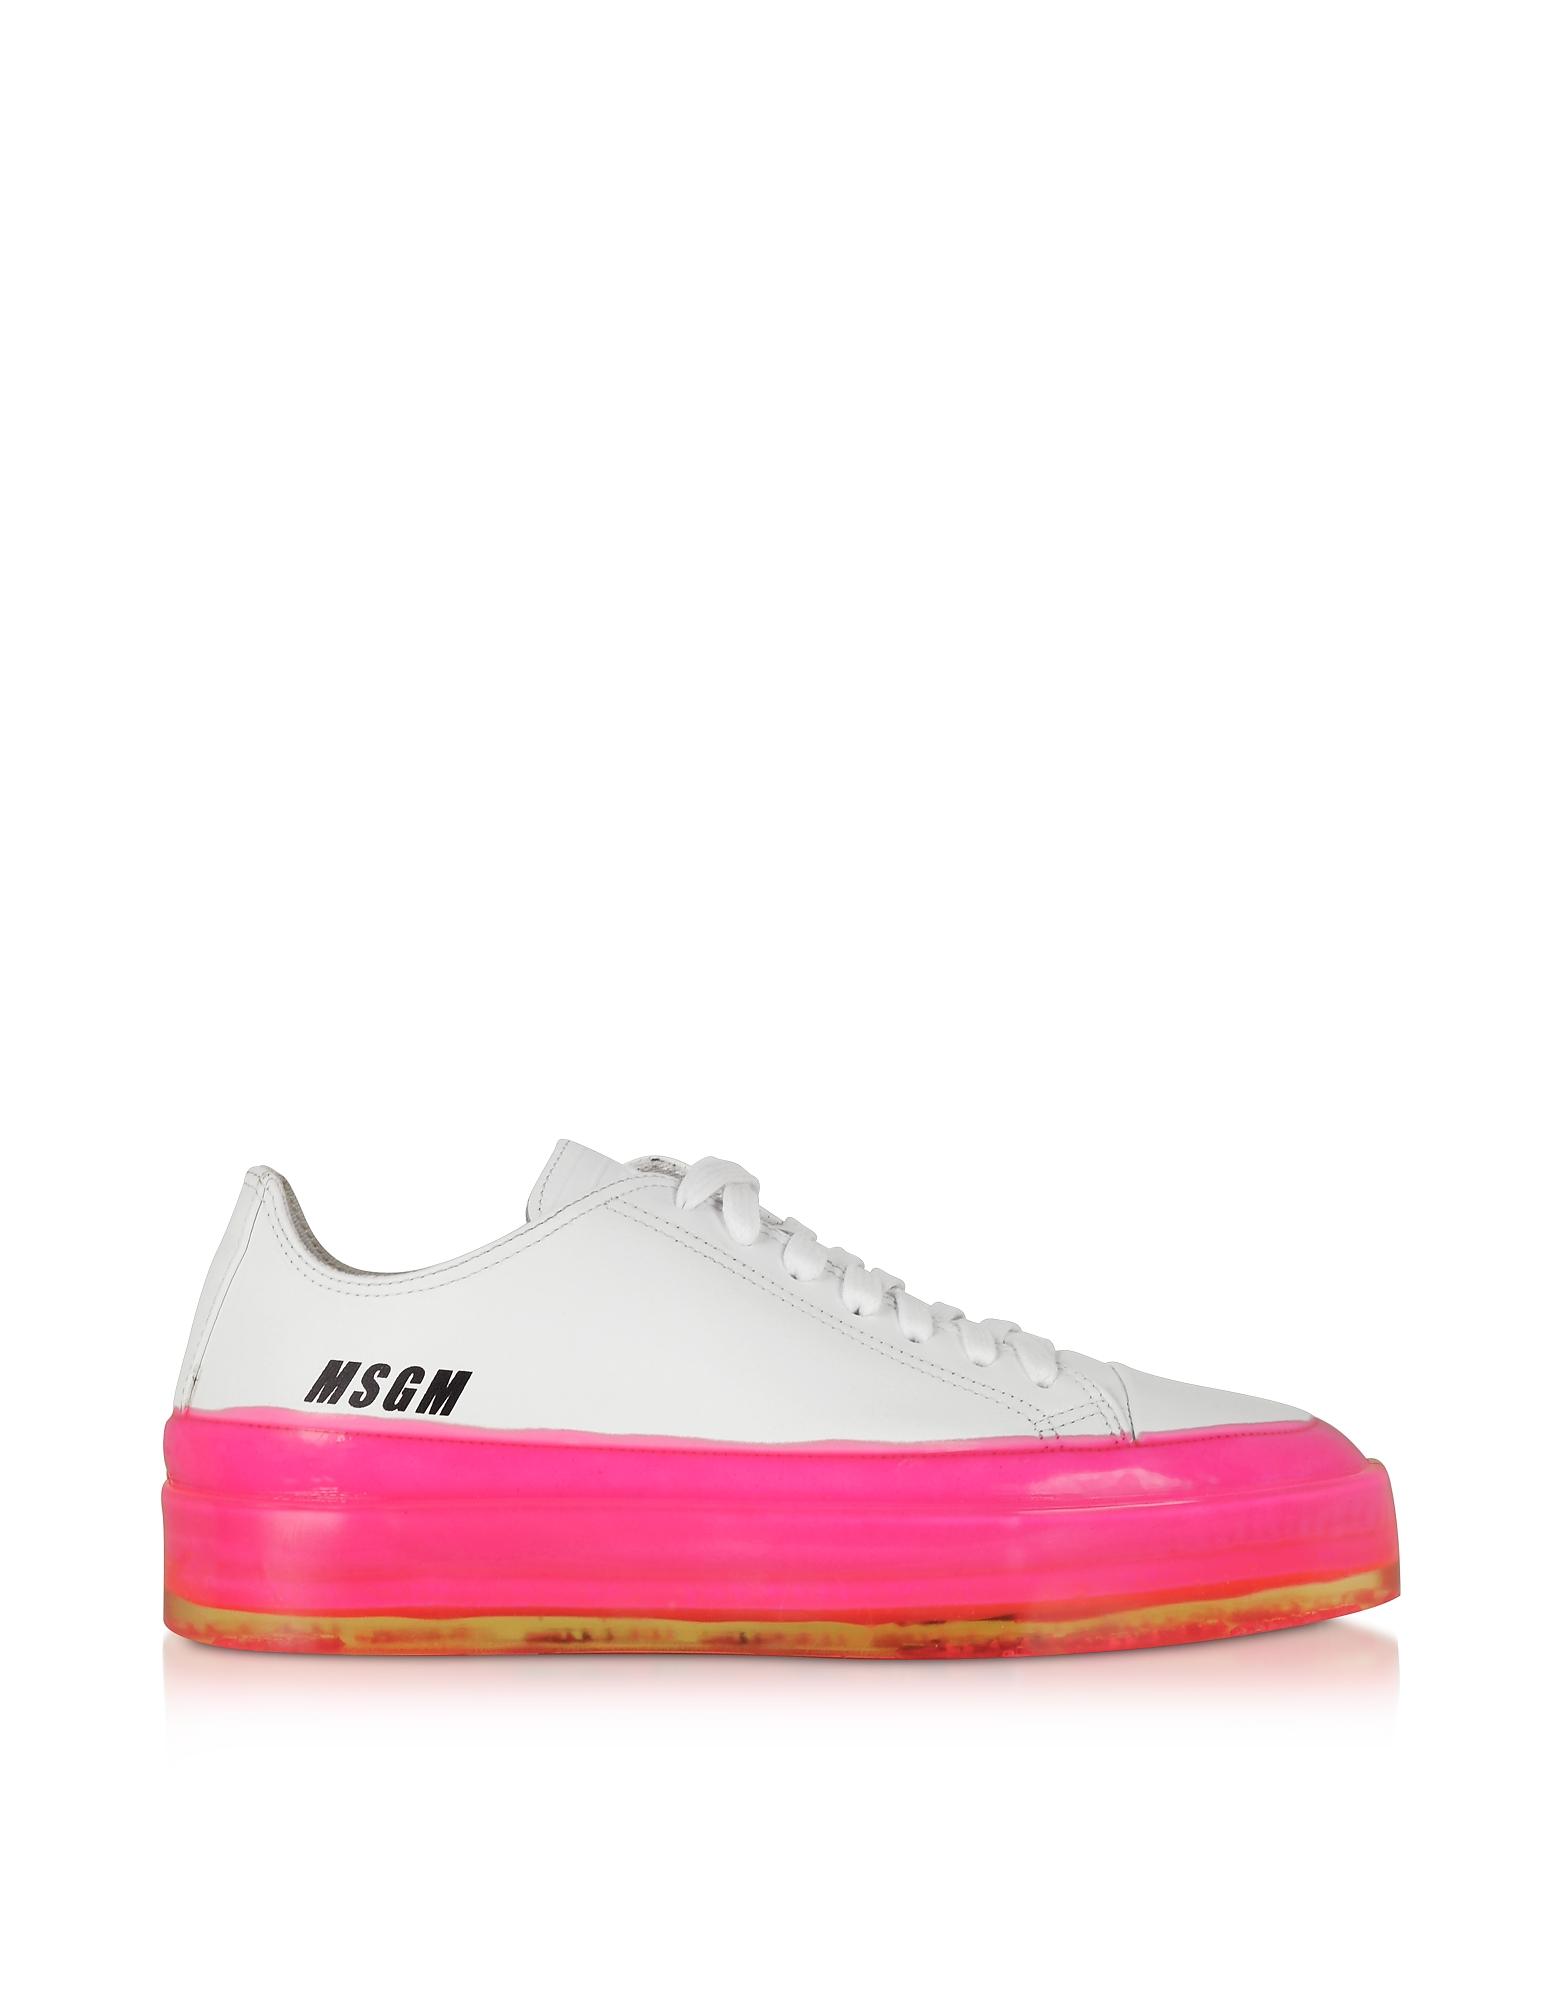 MSGM Leather Fuchsia Floating Sneakers in White - Lyst